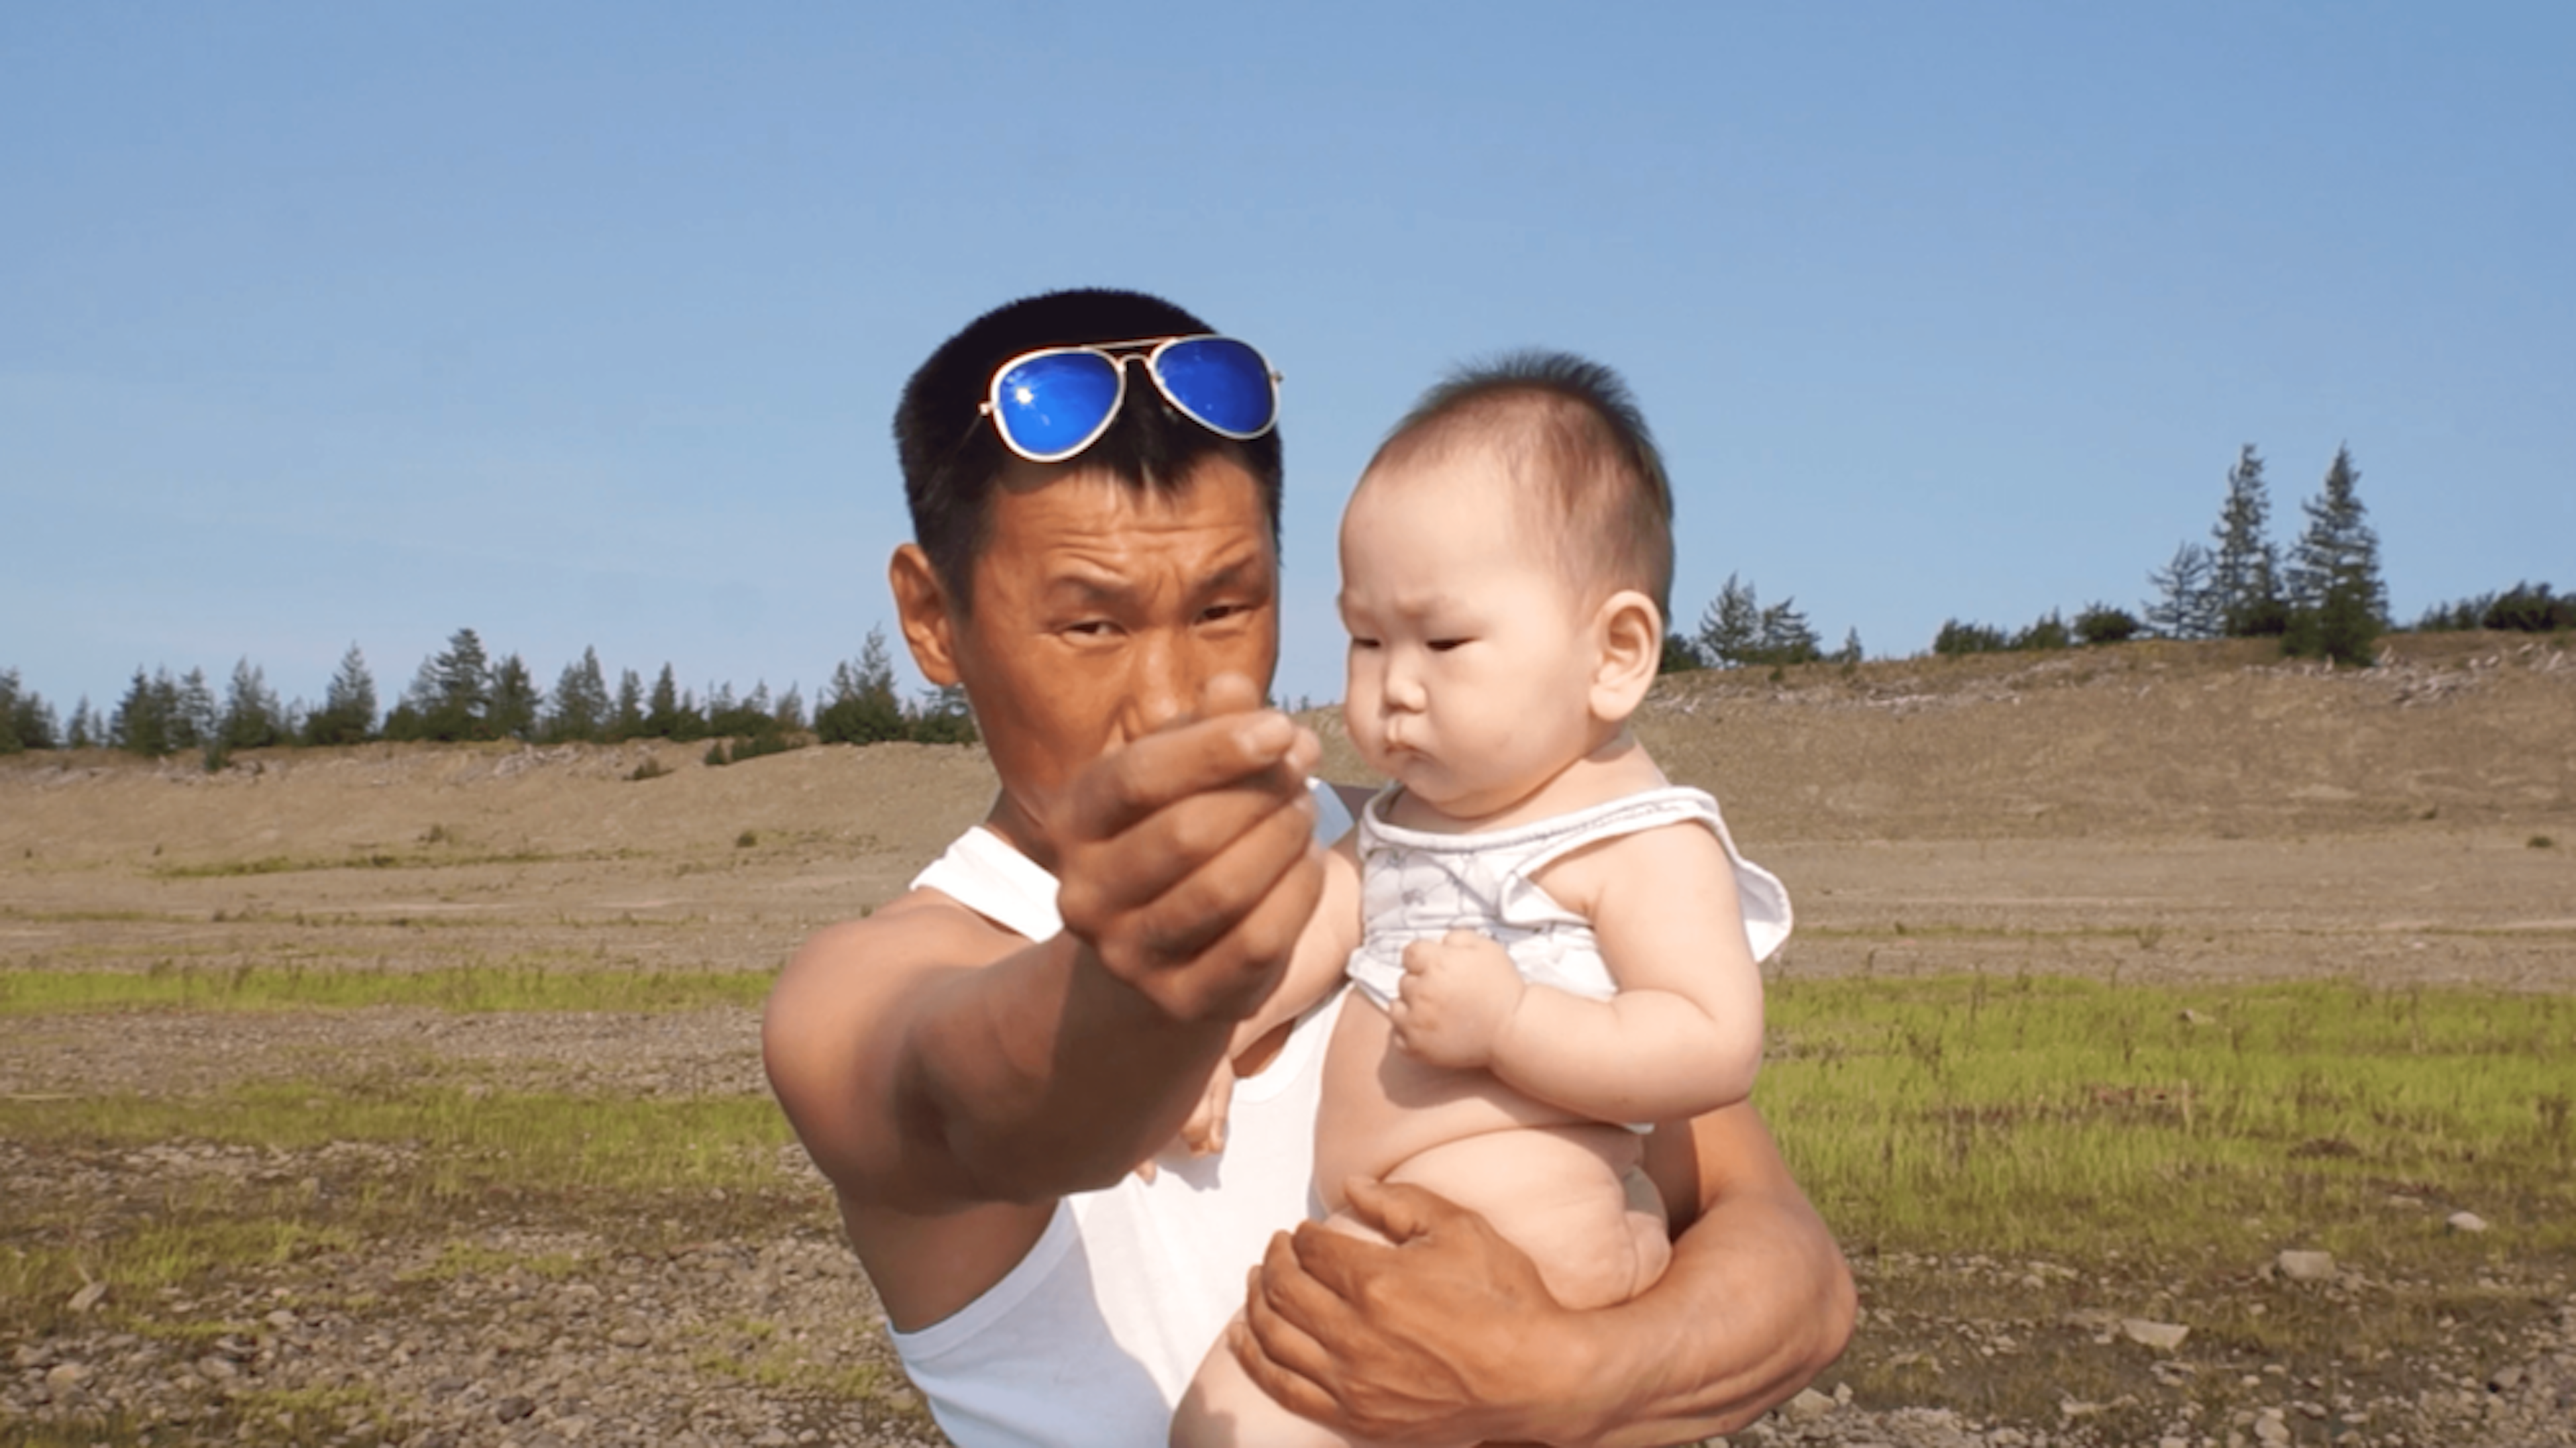 Man wearing blue-tinted sunglasses on his head holds a baby, his free hand close to the lens with thumb and index finger appearing to rub against each other. They are outside in a field on a blue, sunny day.